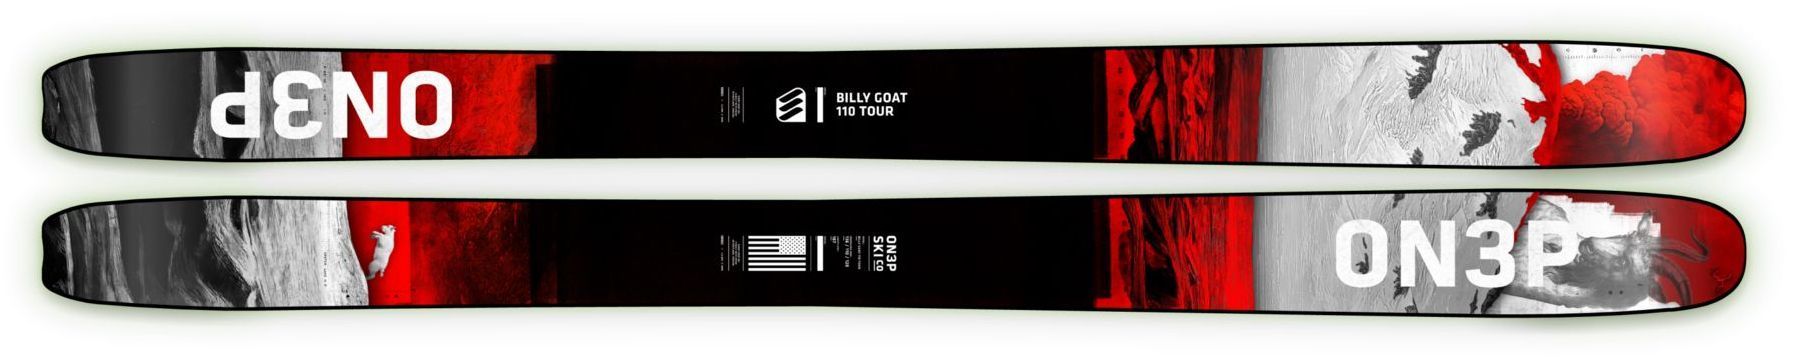 BILLY GOAT 110 TOUR